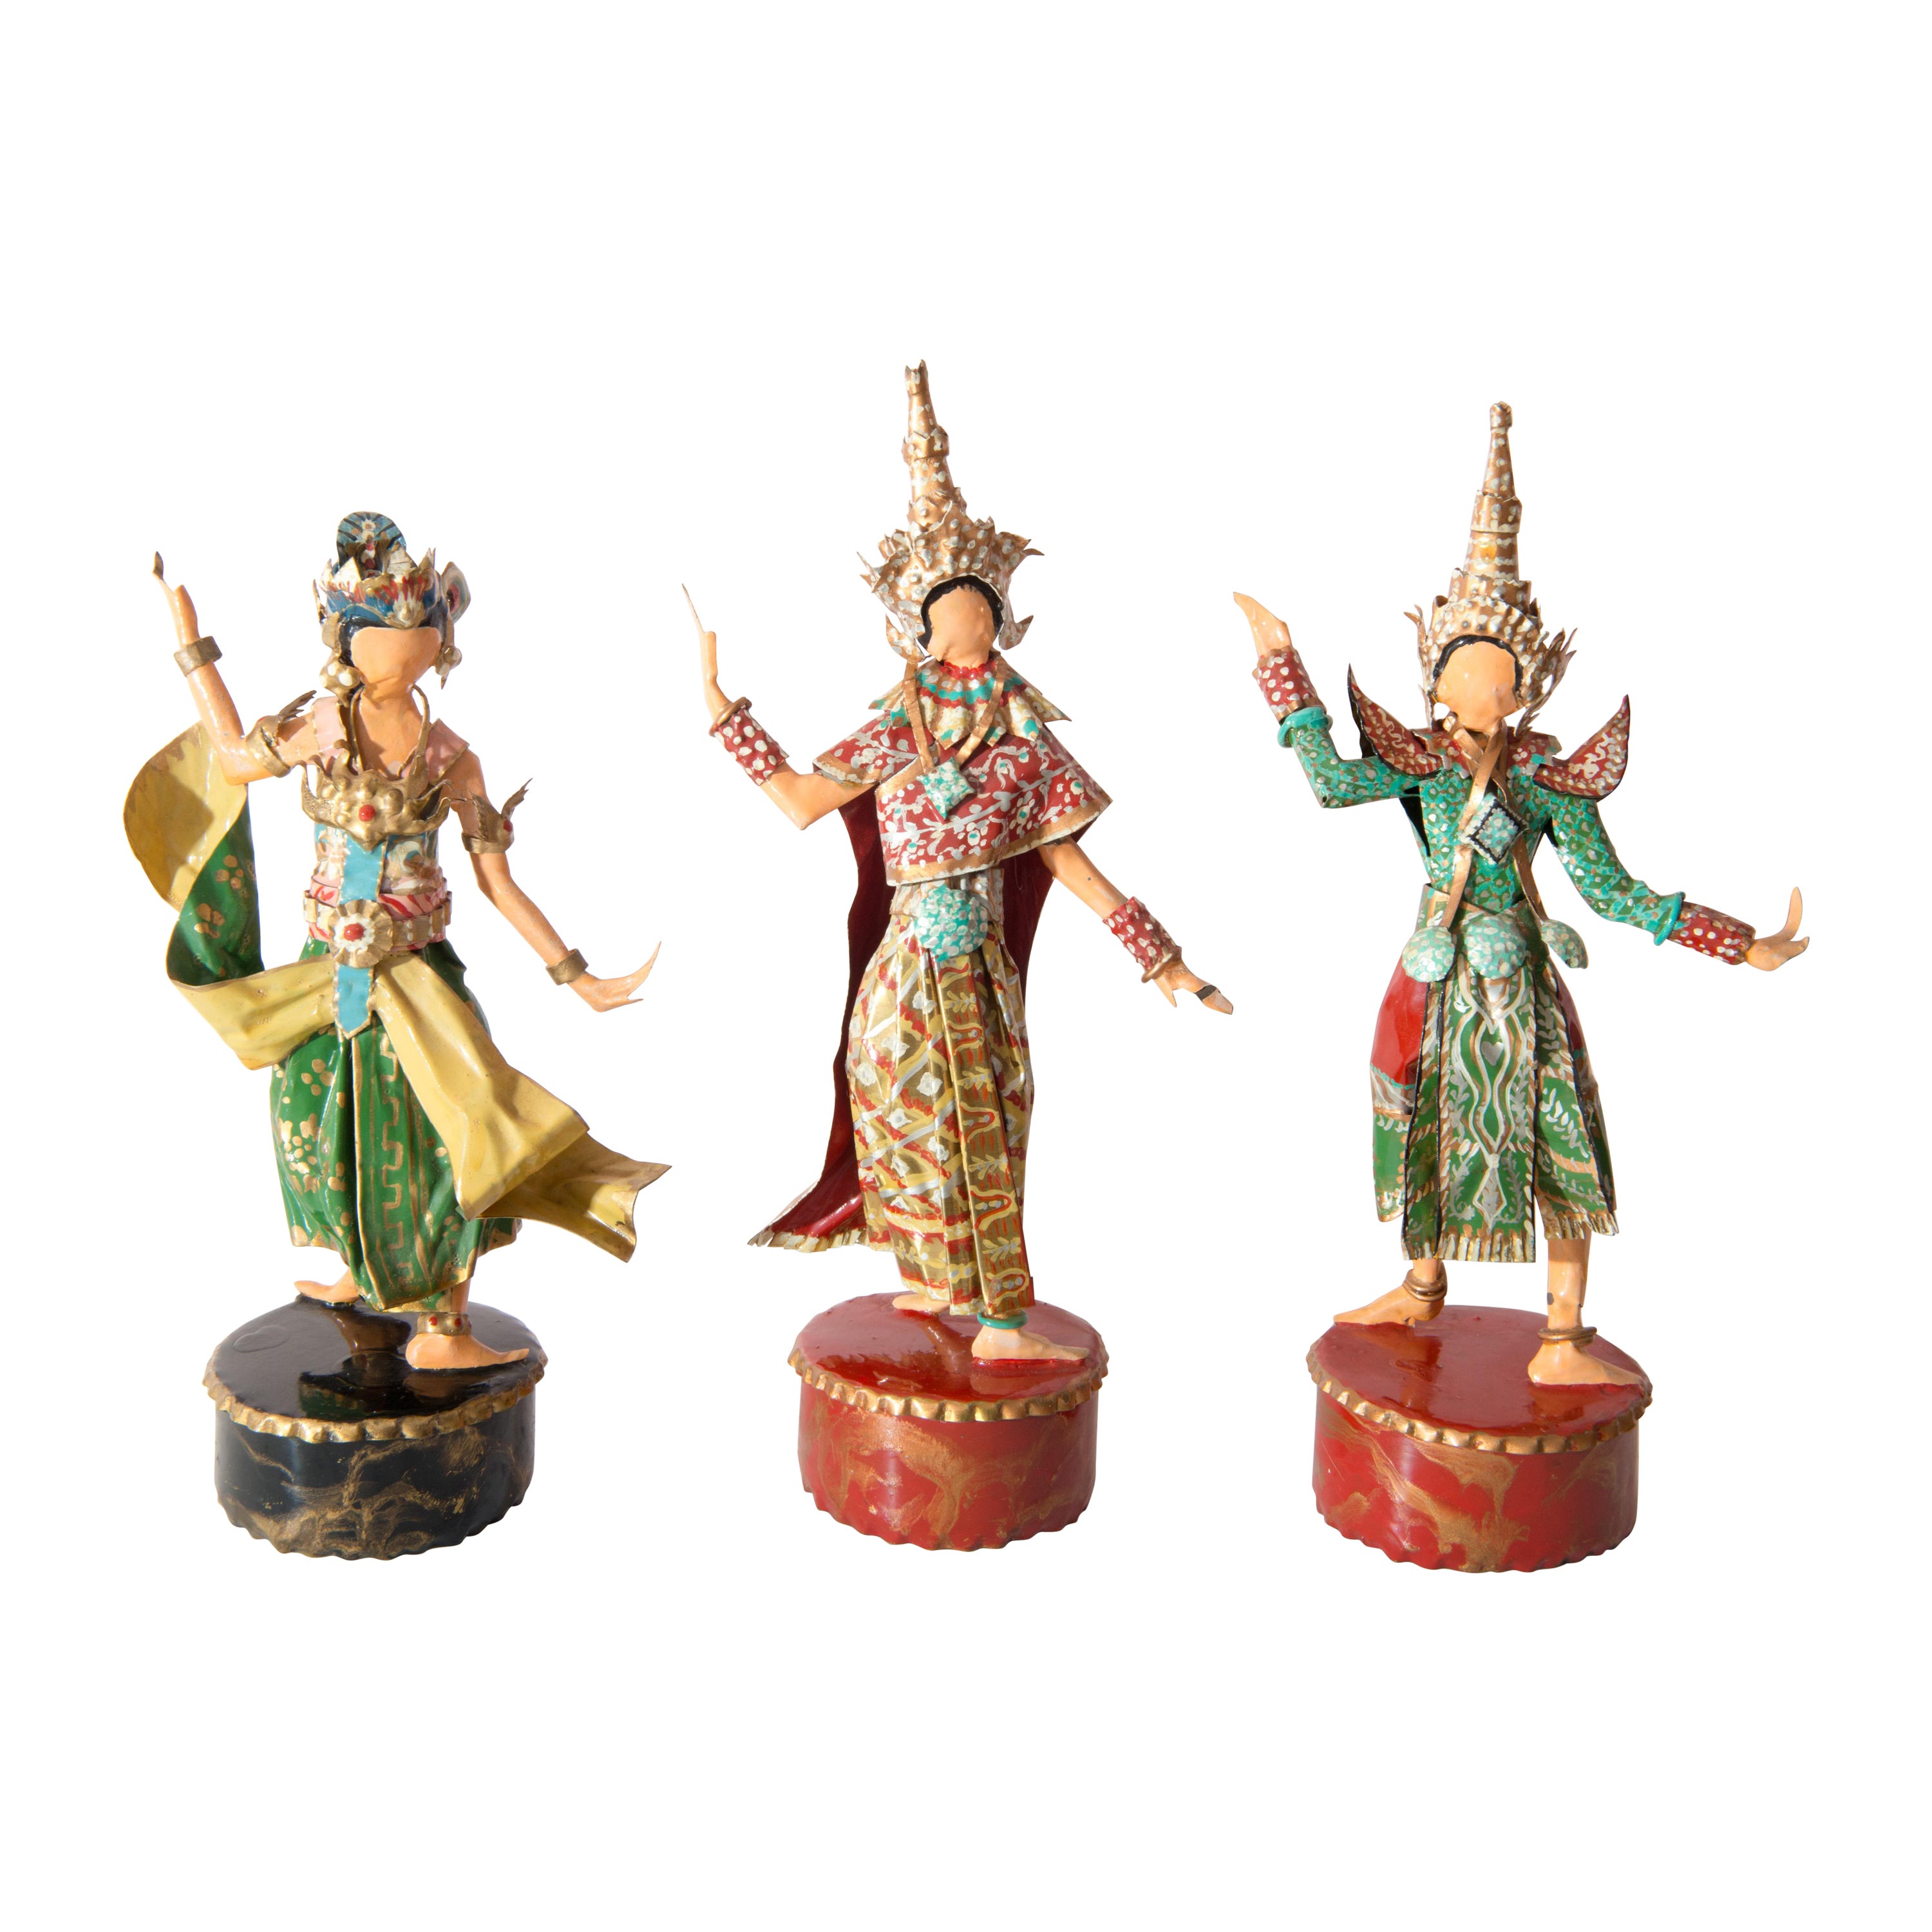 Trio of Thailand Dance Costumed Sculptures by Lee Menichetti For Sale